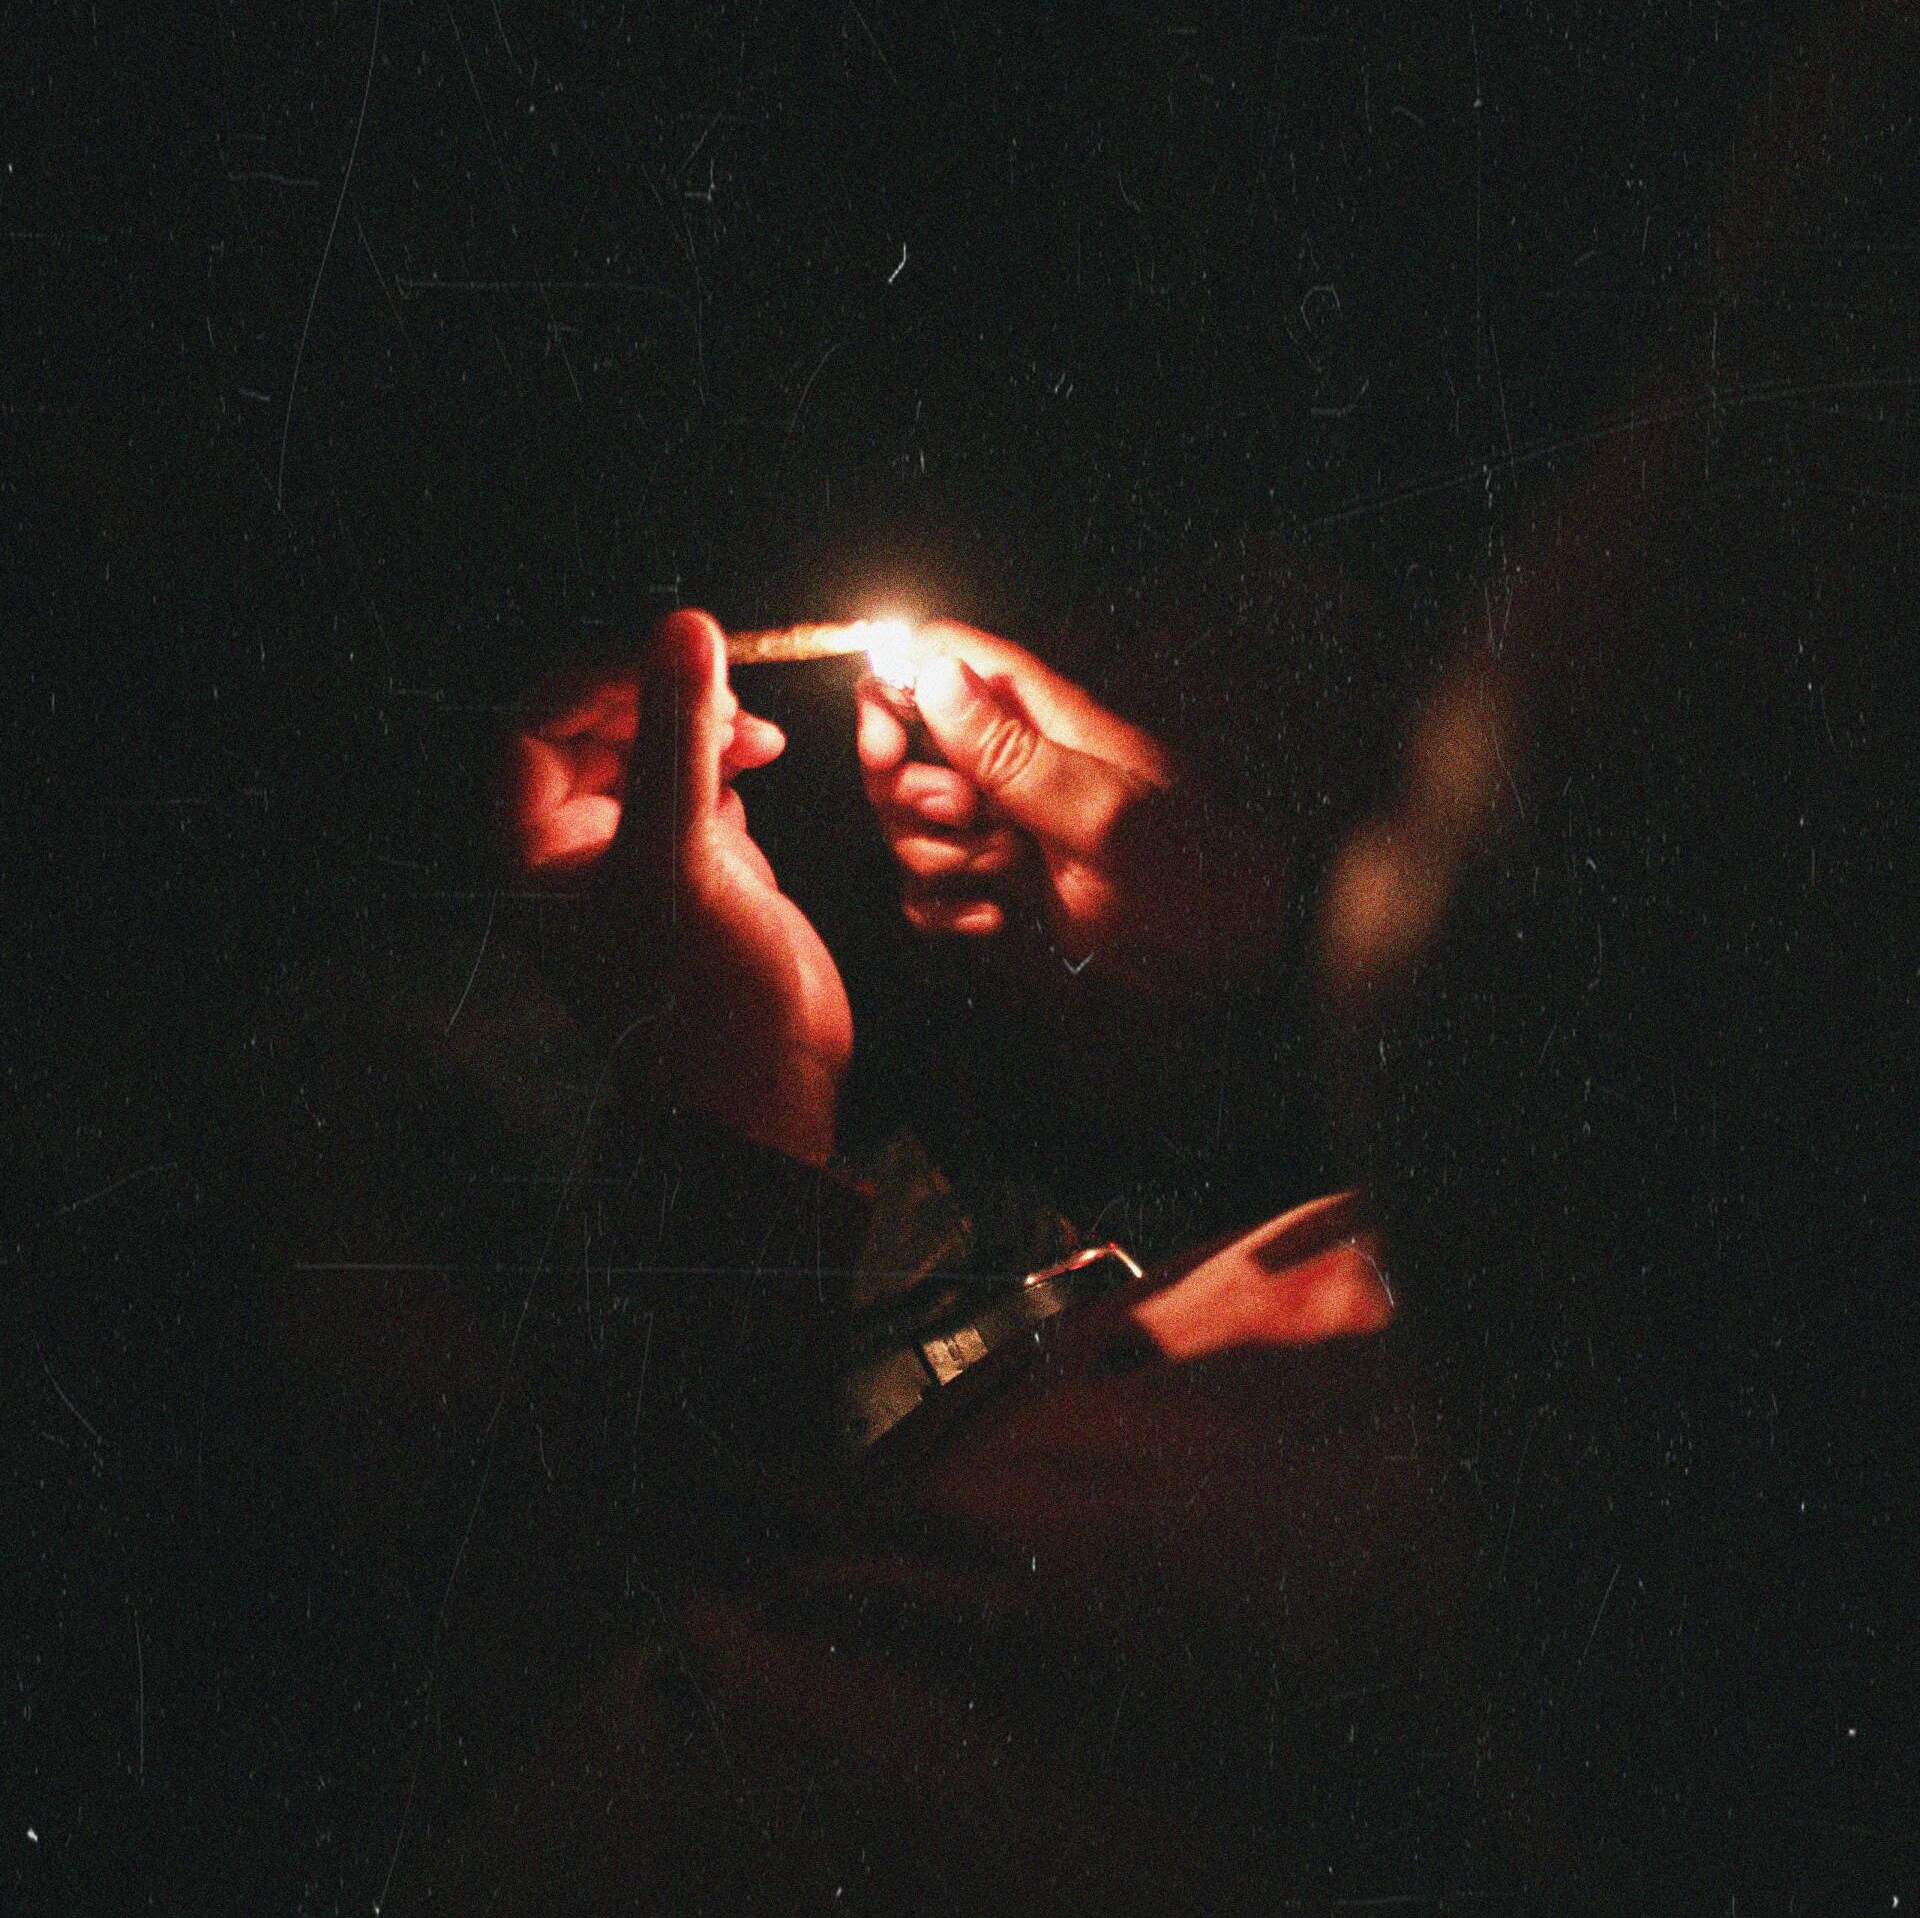 Hands lighting a joint in the dark